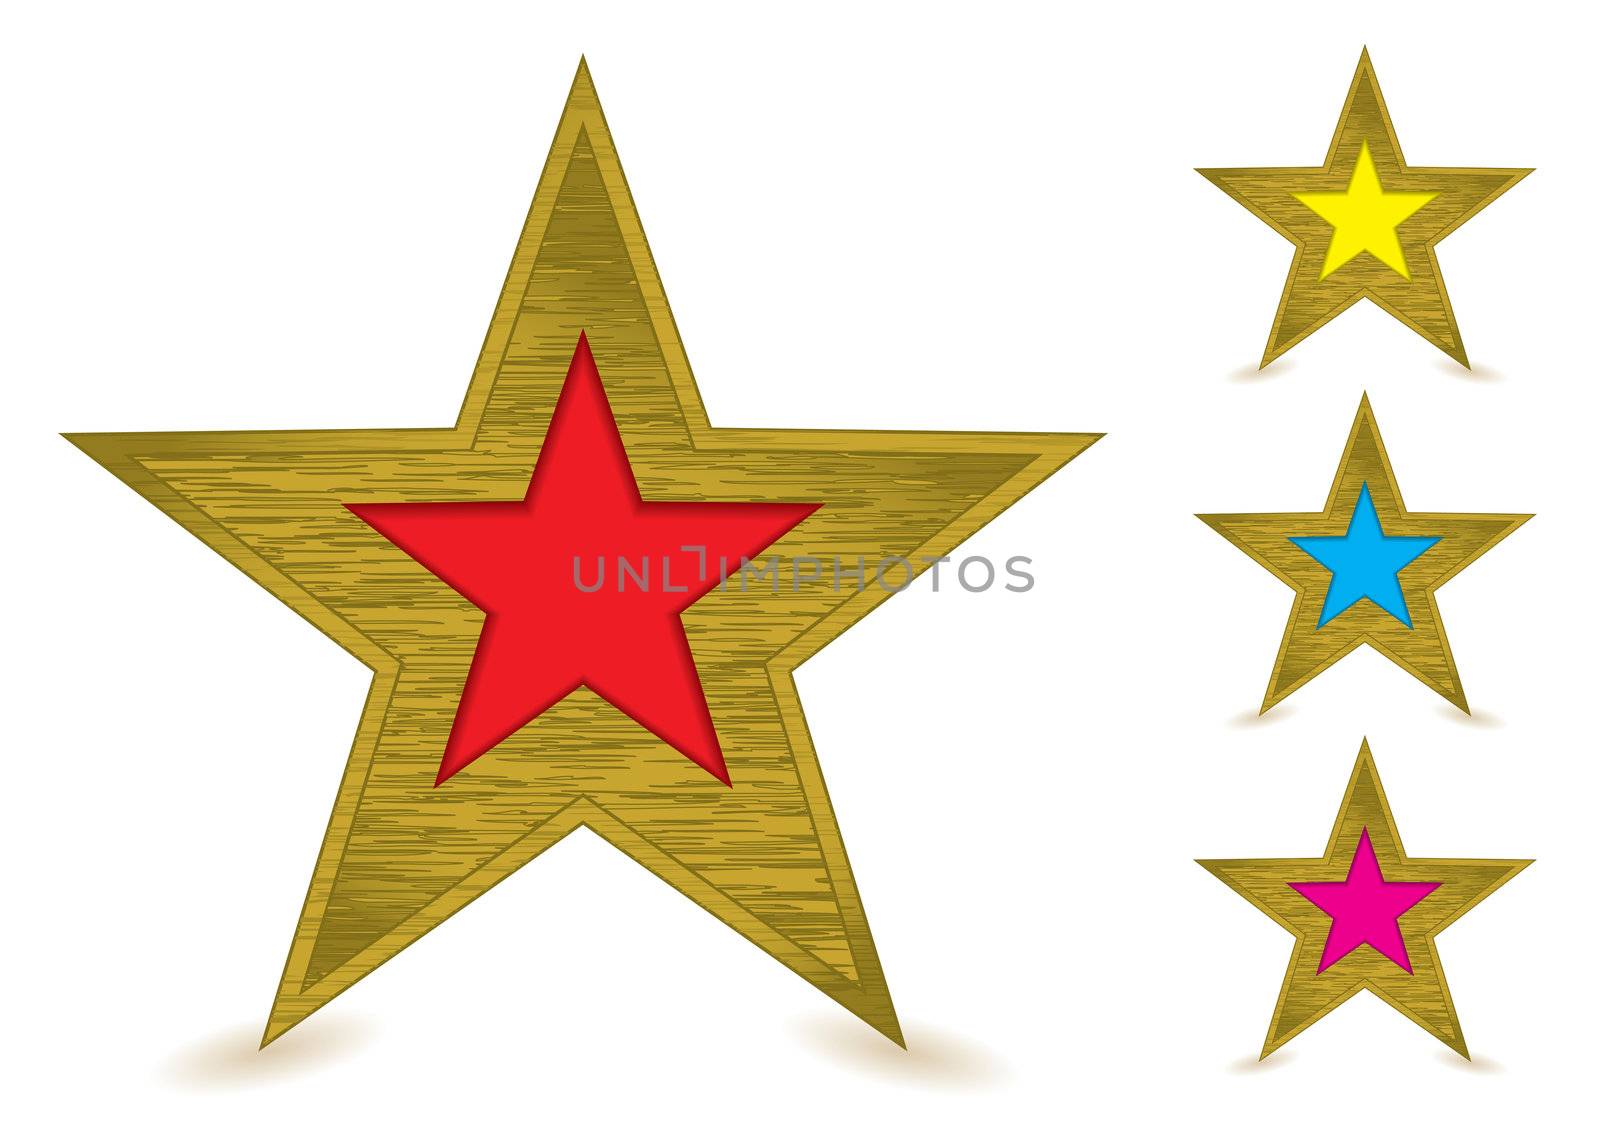 Collection of brushed metal gold star awards with coloured centers